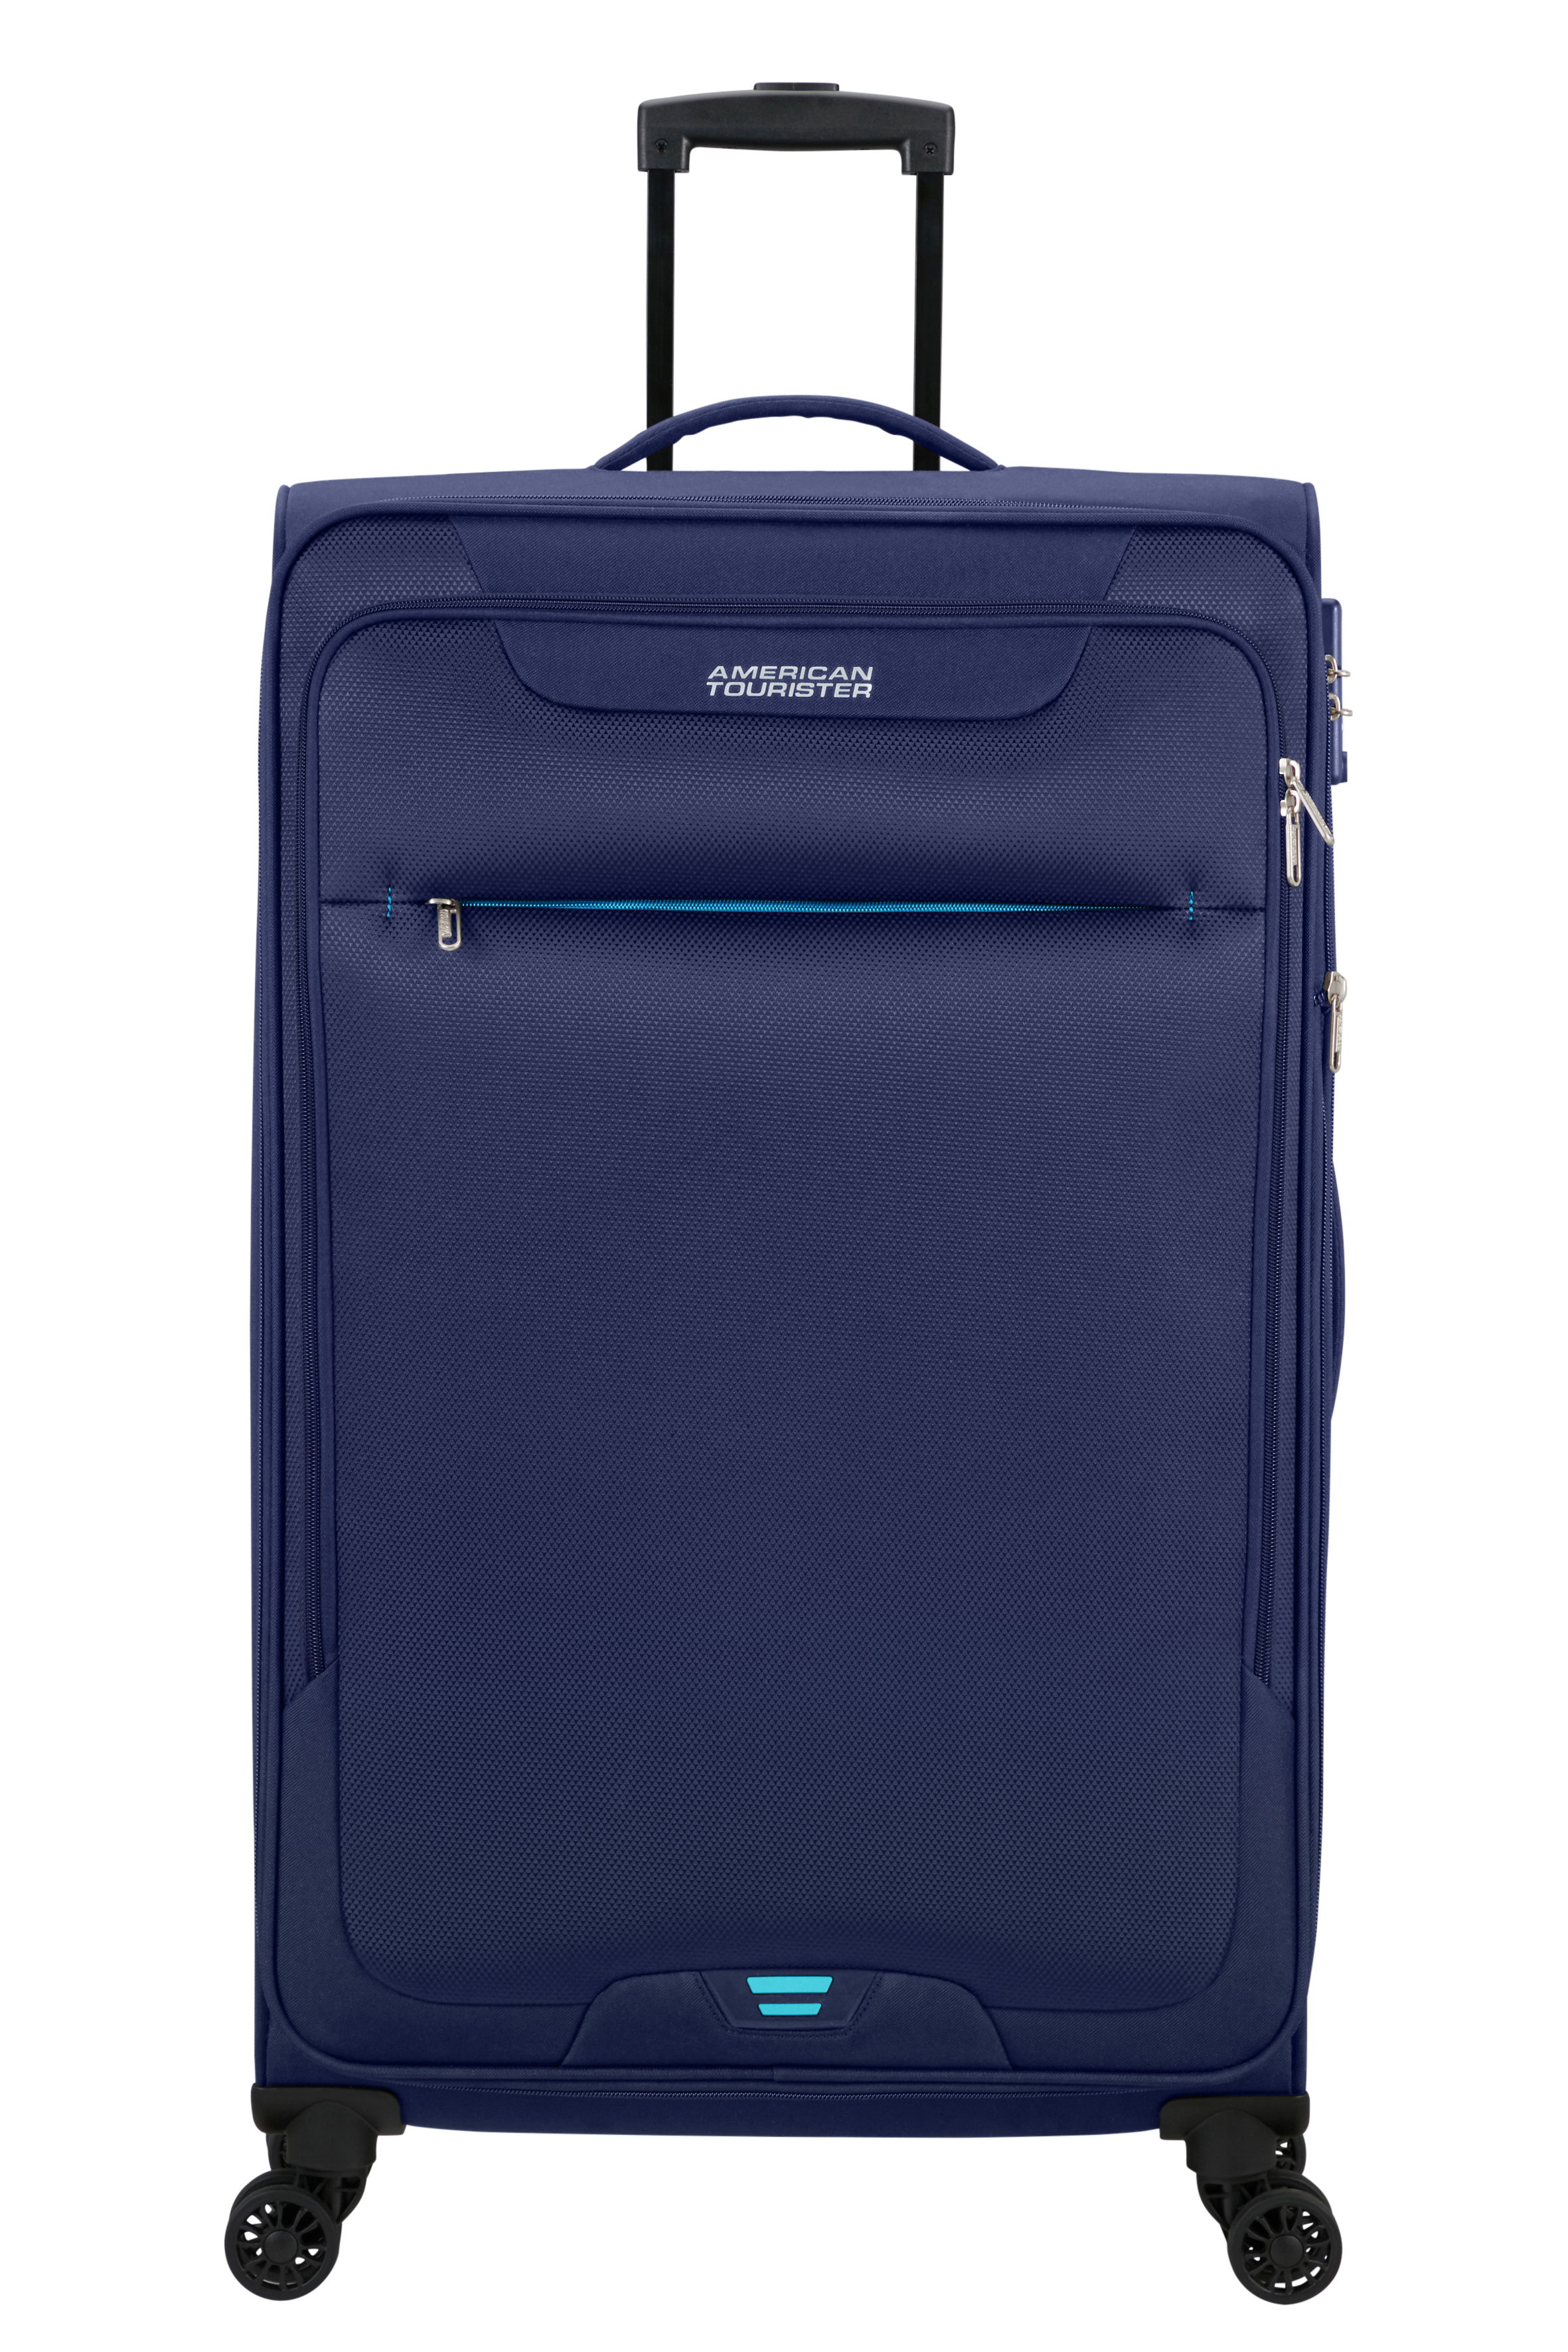 American Tourister Trolley Street Roll 75cm navy